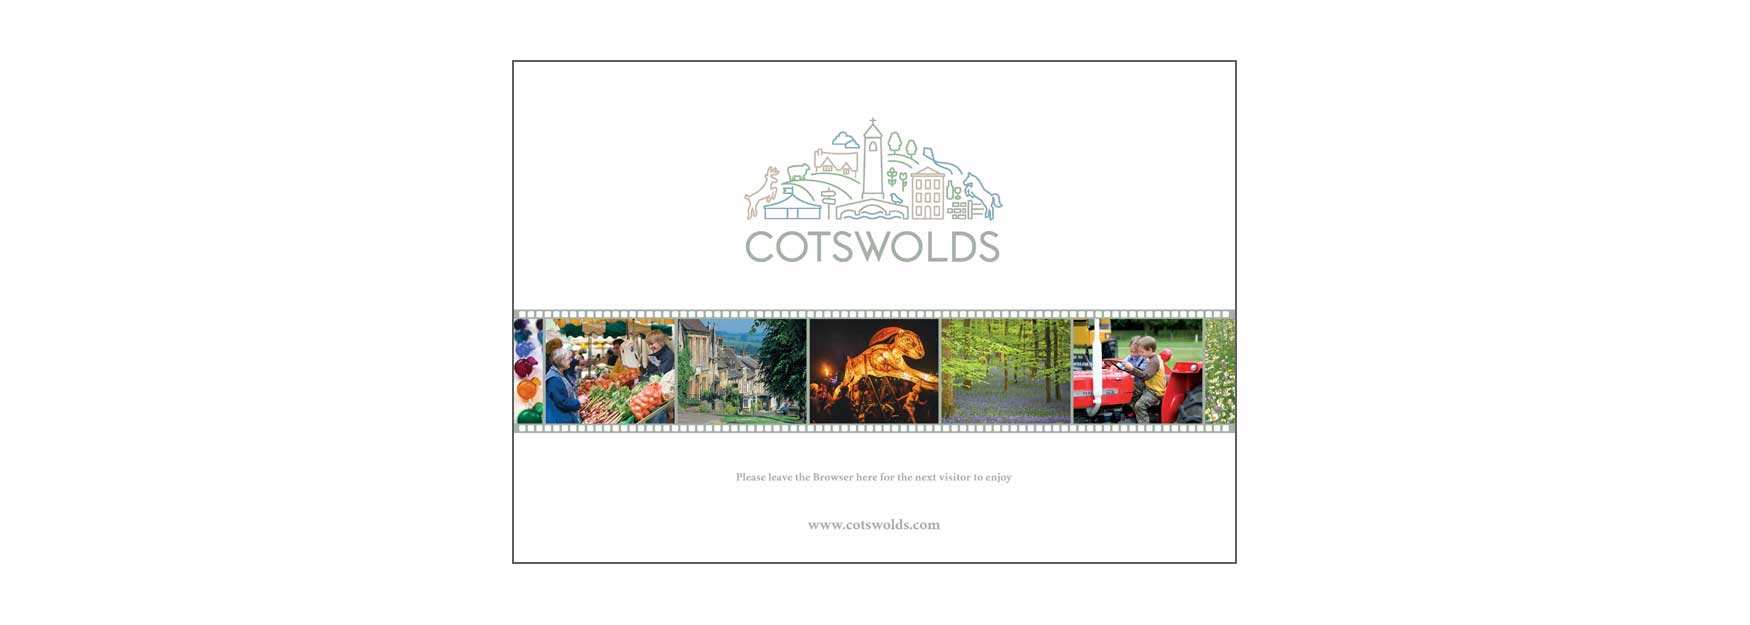 Advertise in the Cotswolds Browser